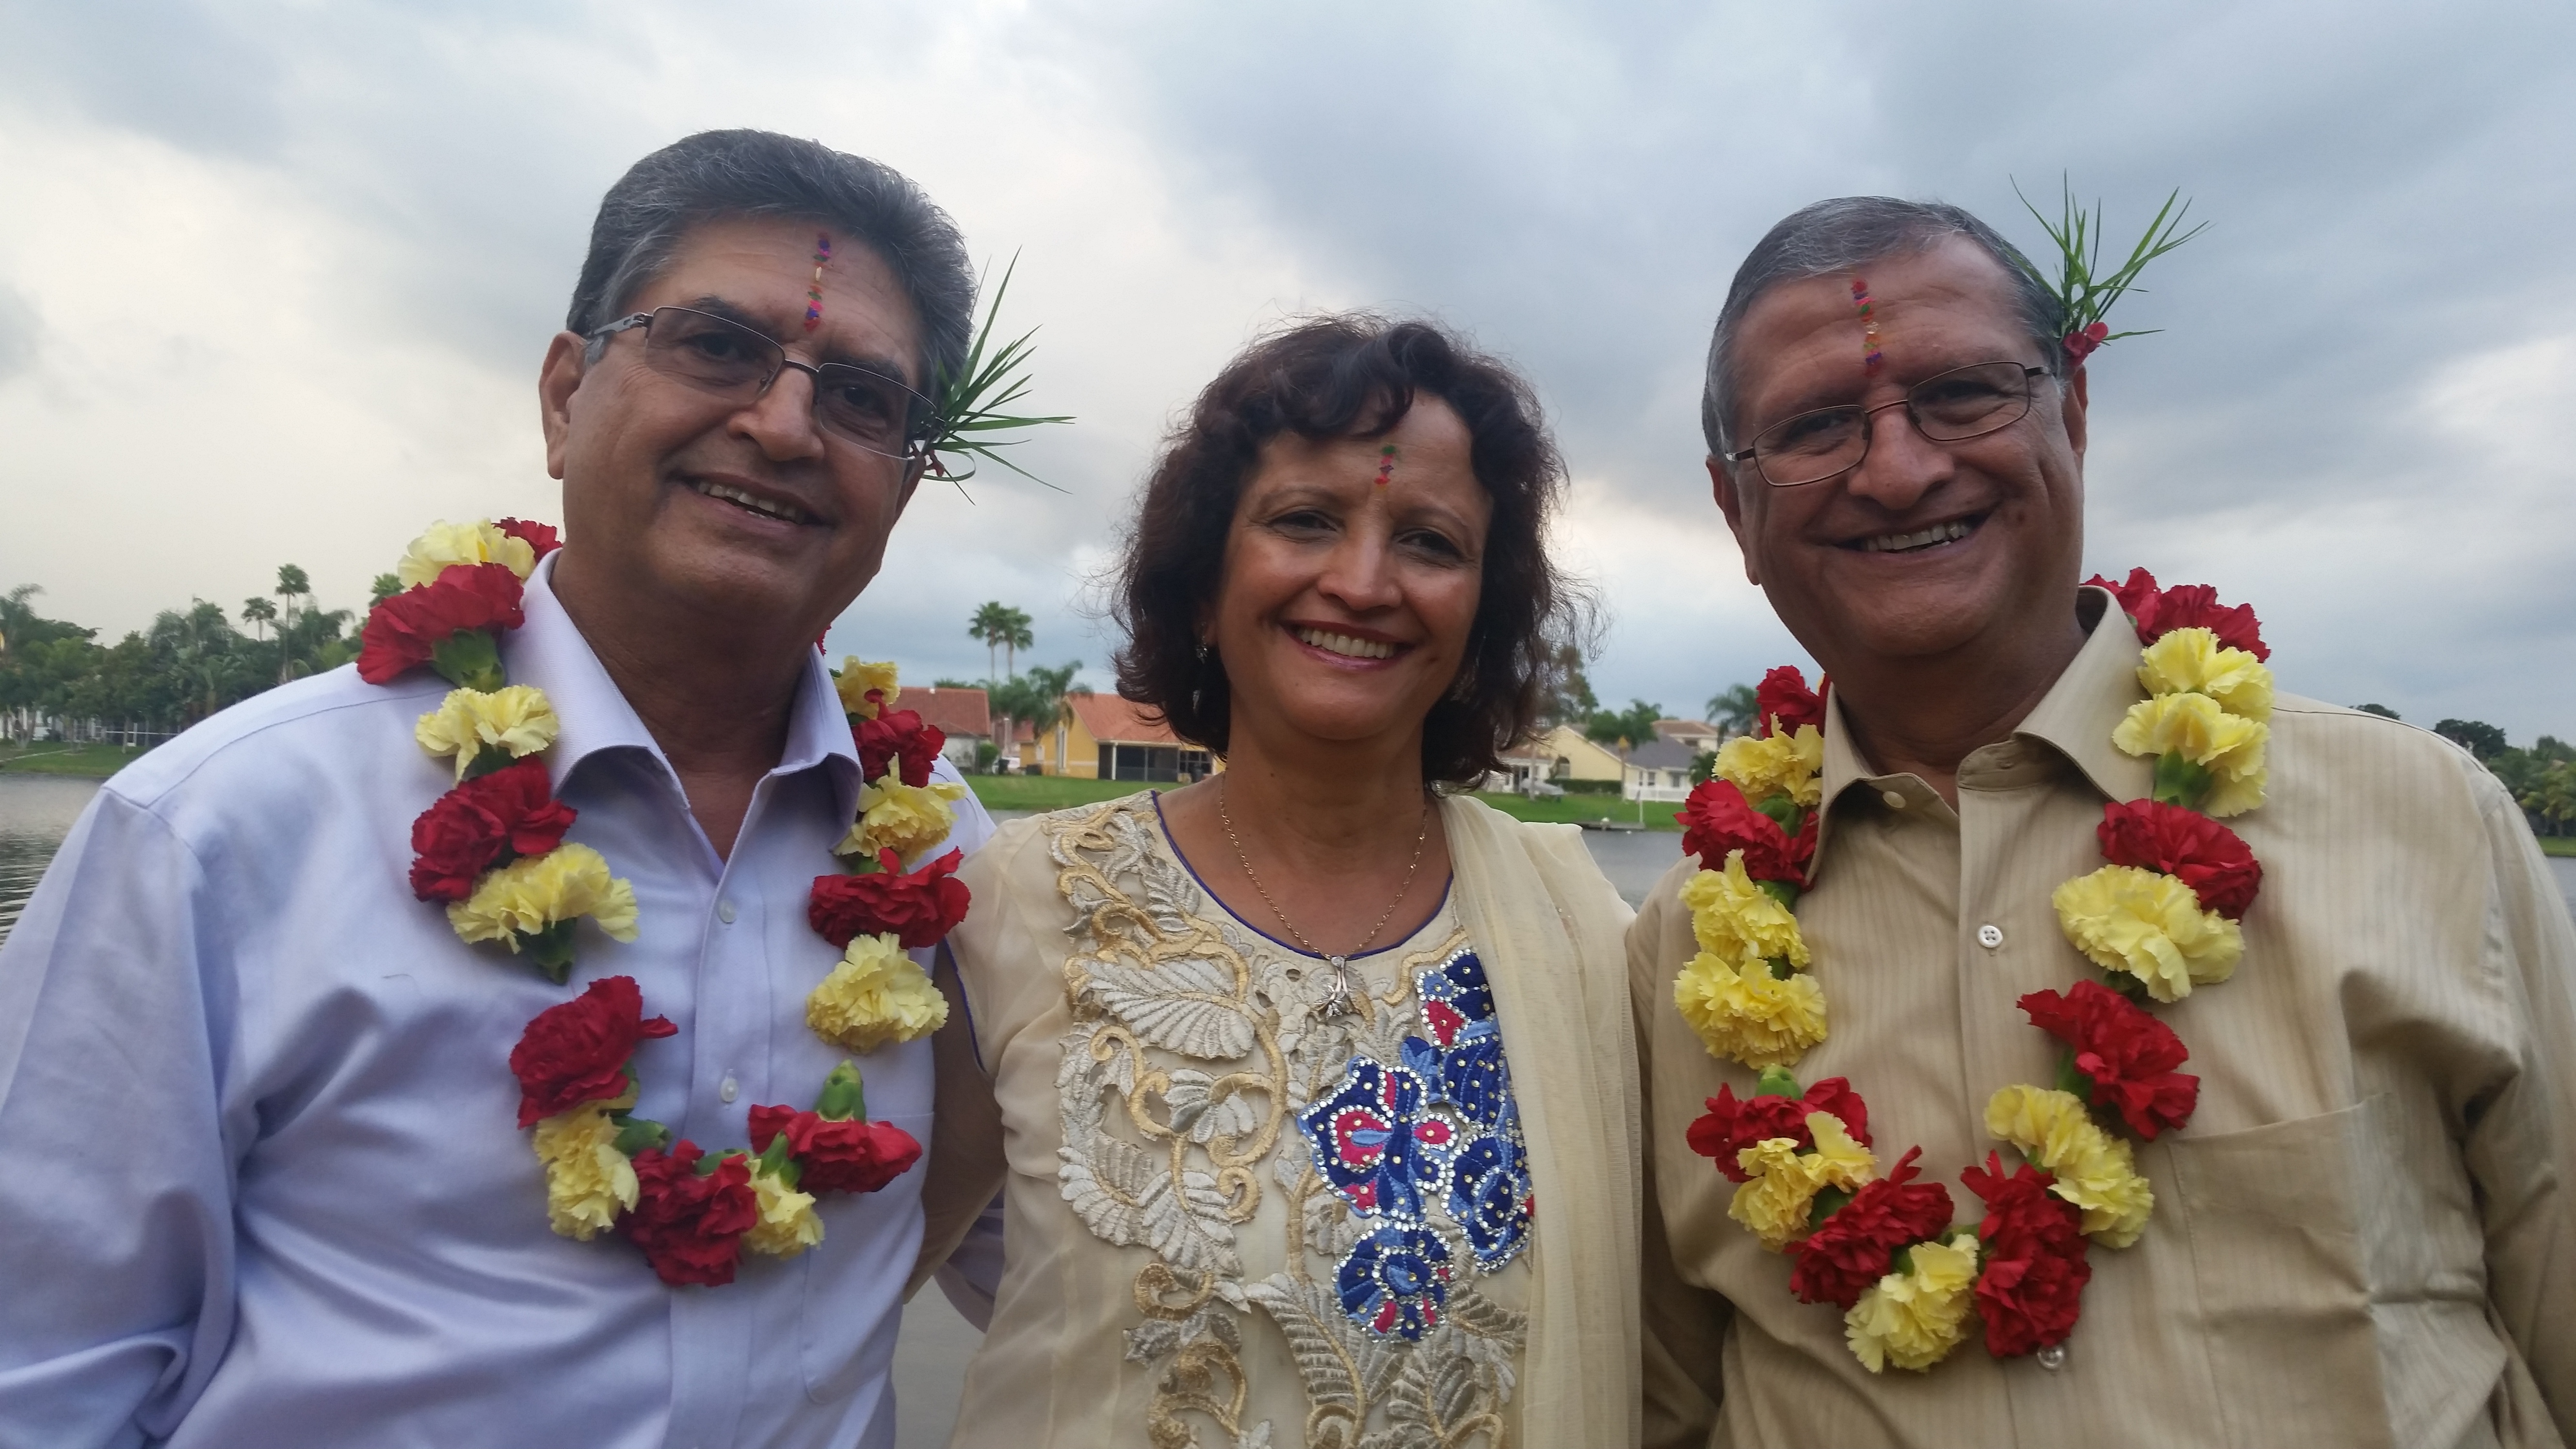 Usha Sharma and two of her older brothers, Bheem Kattel (left) and Bijaya Kattel, after the ceremony honoring siblings on the fifth day of Tihar, also known as Diwali. Photo credit: Usha Sharma.